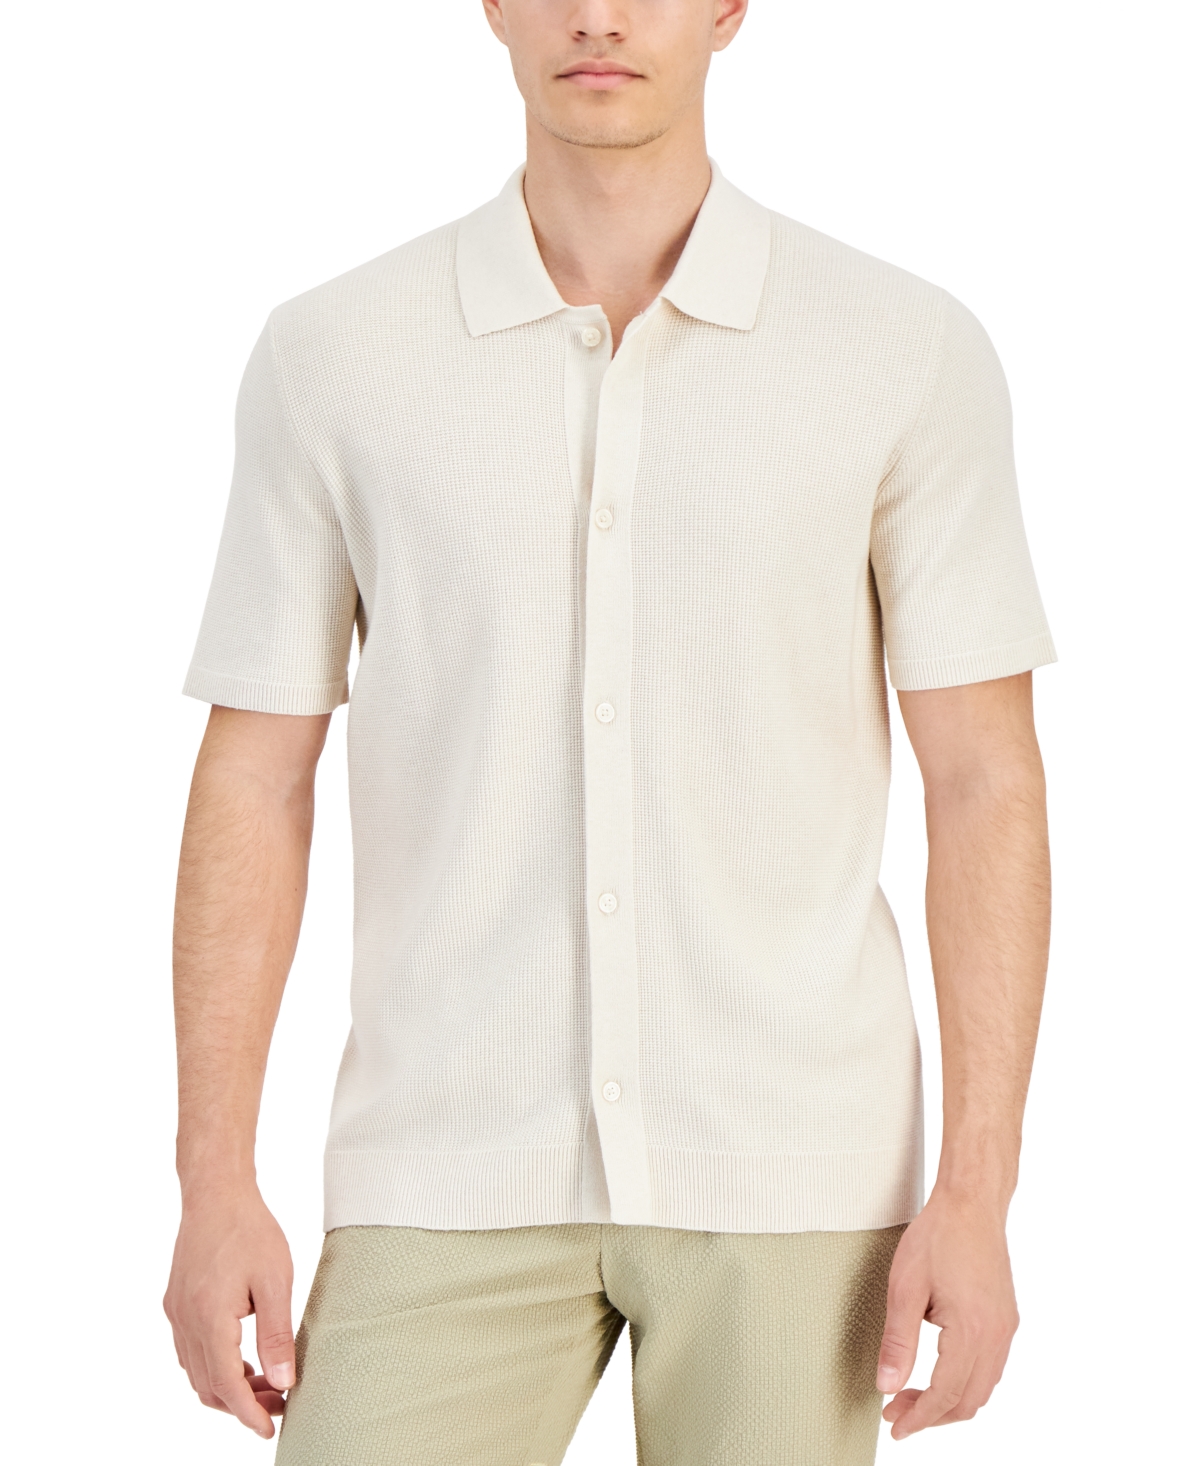 Men's Short Sleeve Textured Knit Button-Down Polo Shirt, Created for Macy's - Fennel Beige